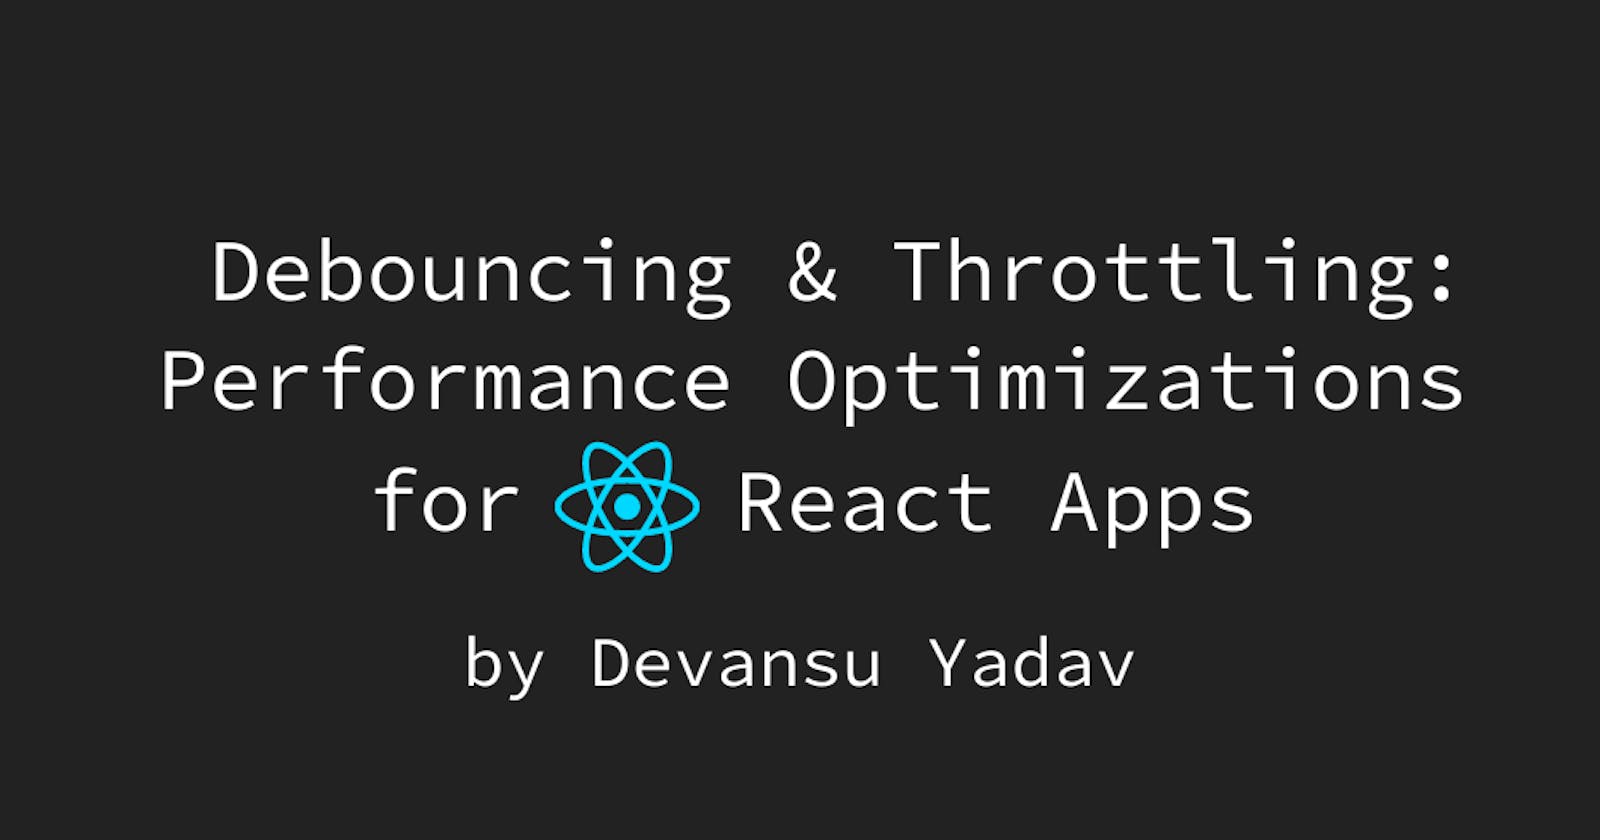 Make your React Apps more performant using Debouncing & Throttling! 🔥🚀